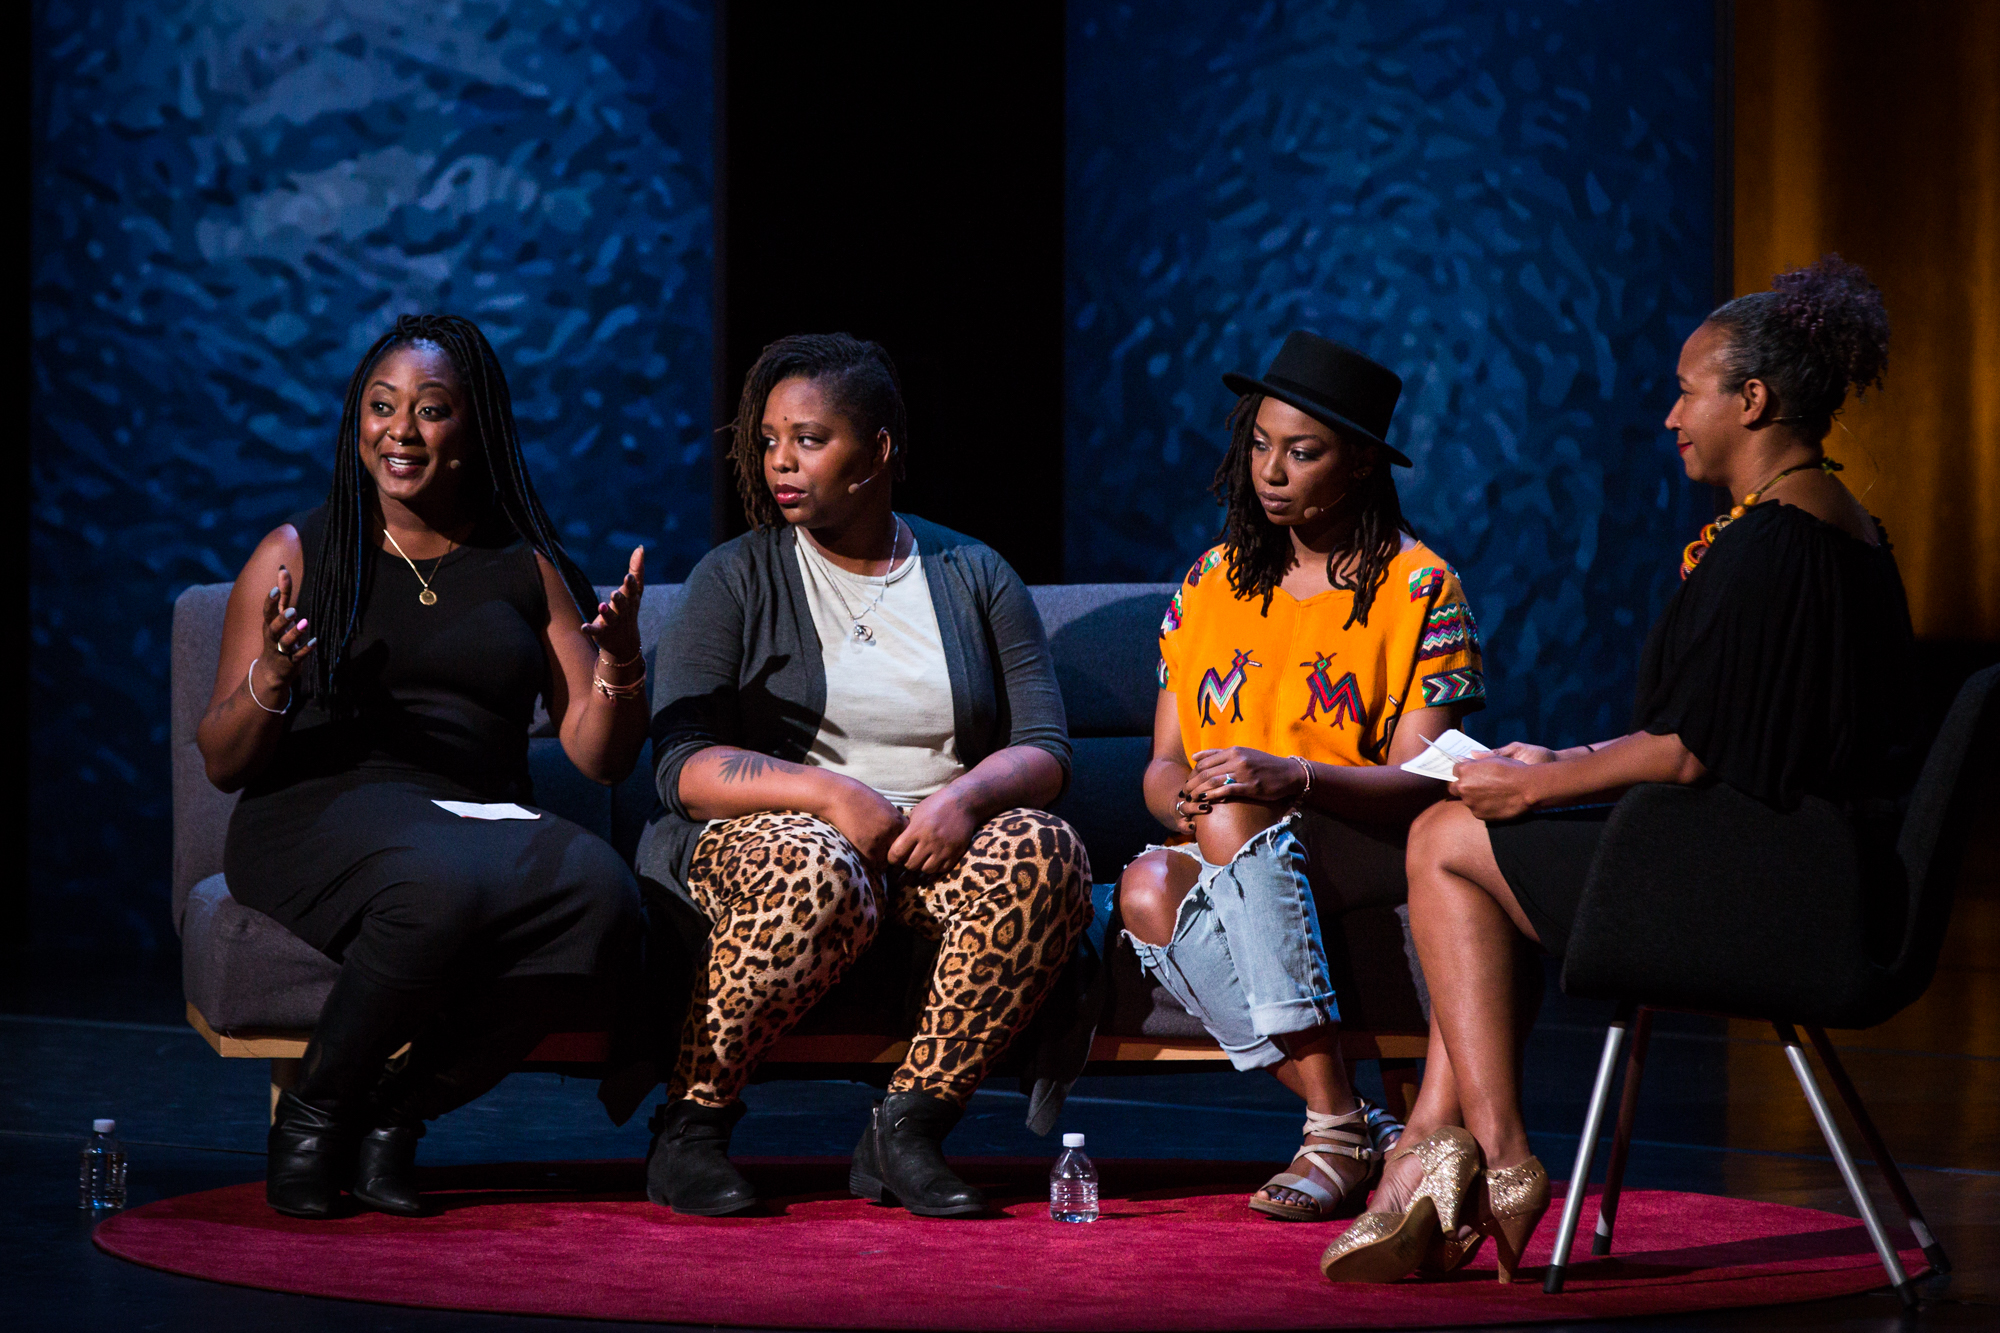 Founders of the Black Lives Matter movement (Alicia Garza, Patrisse Cullors, and Opal Tometi) interviewed by Mia Birdsong at TEDWomen 2016 - It's About Time, October 26-28, 2016, Yerba Buena Centre for the Arts, San Francisco, California. Photo: Marla Aufmuth / TED